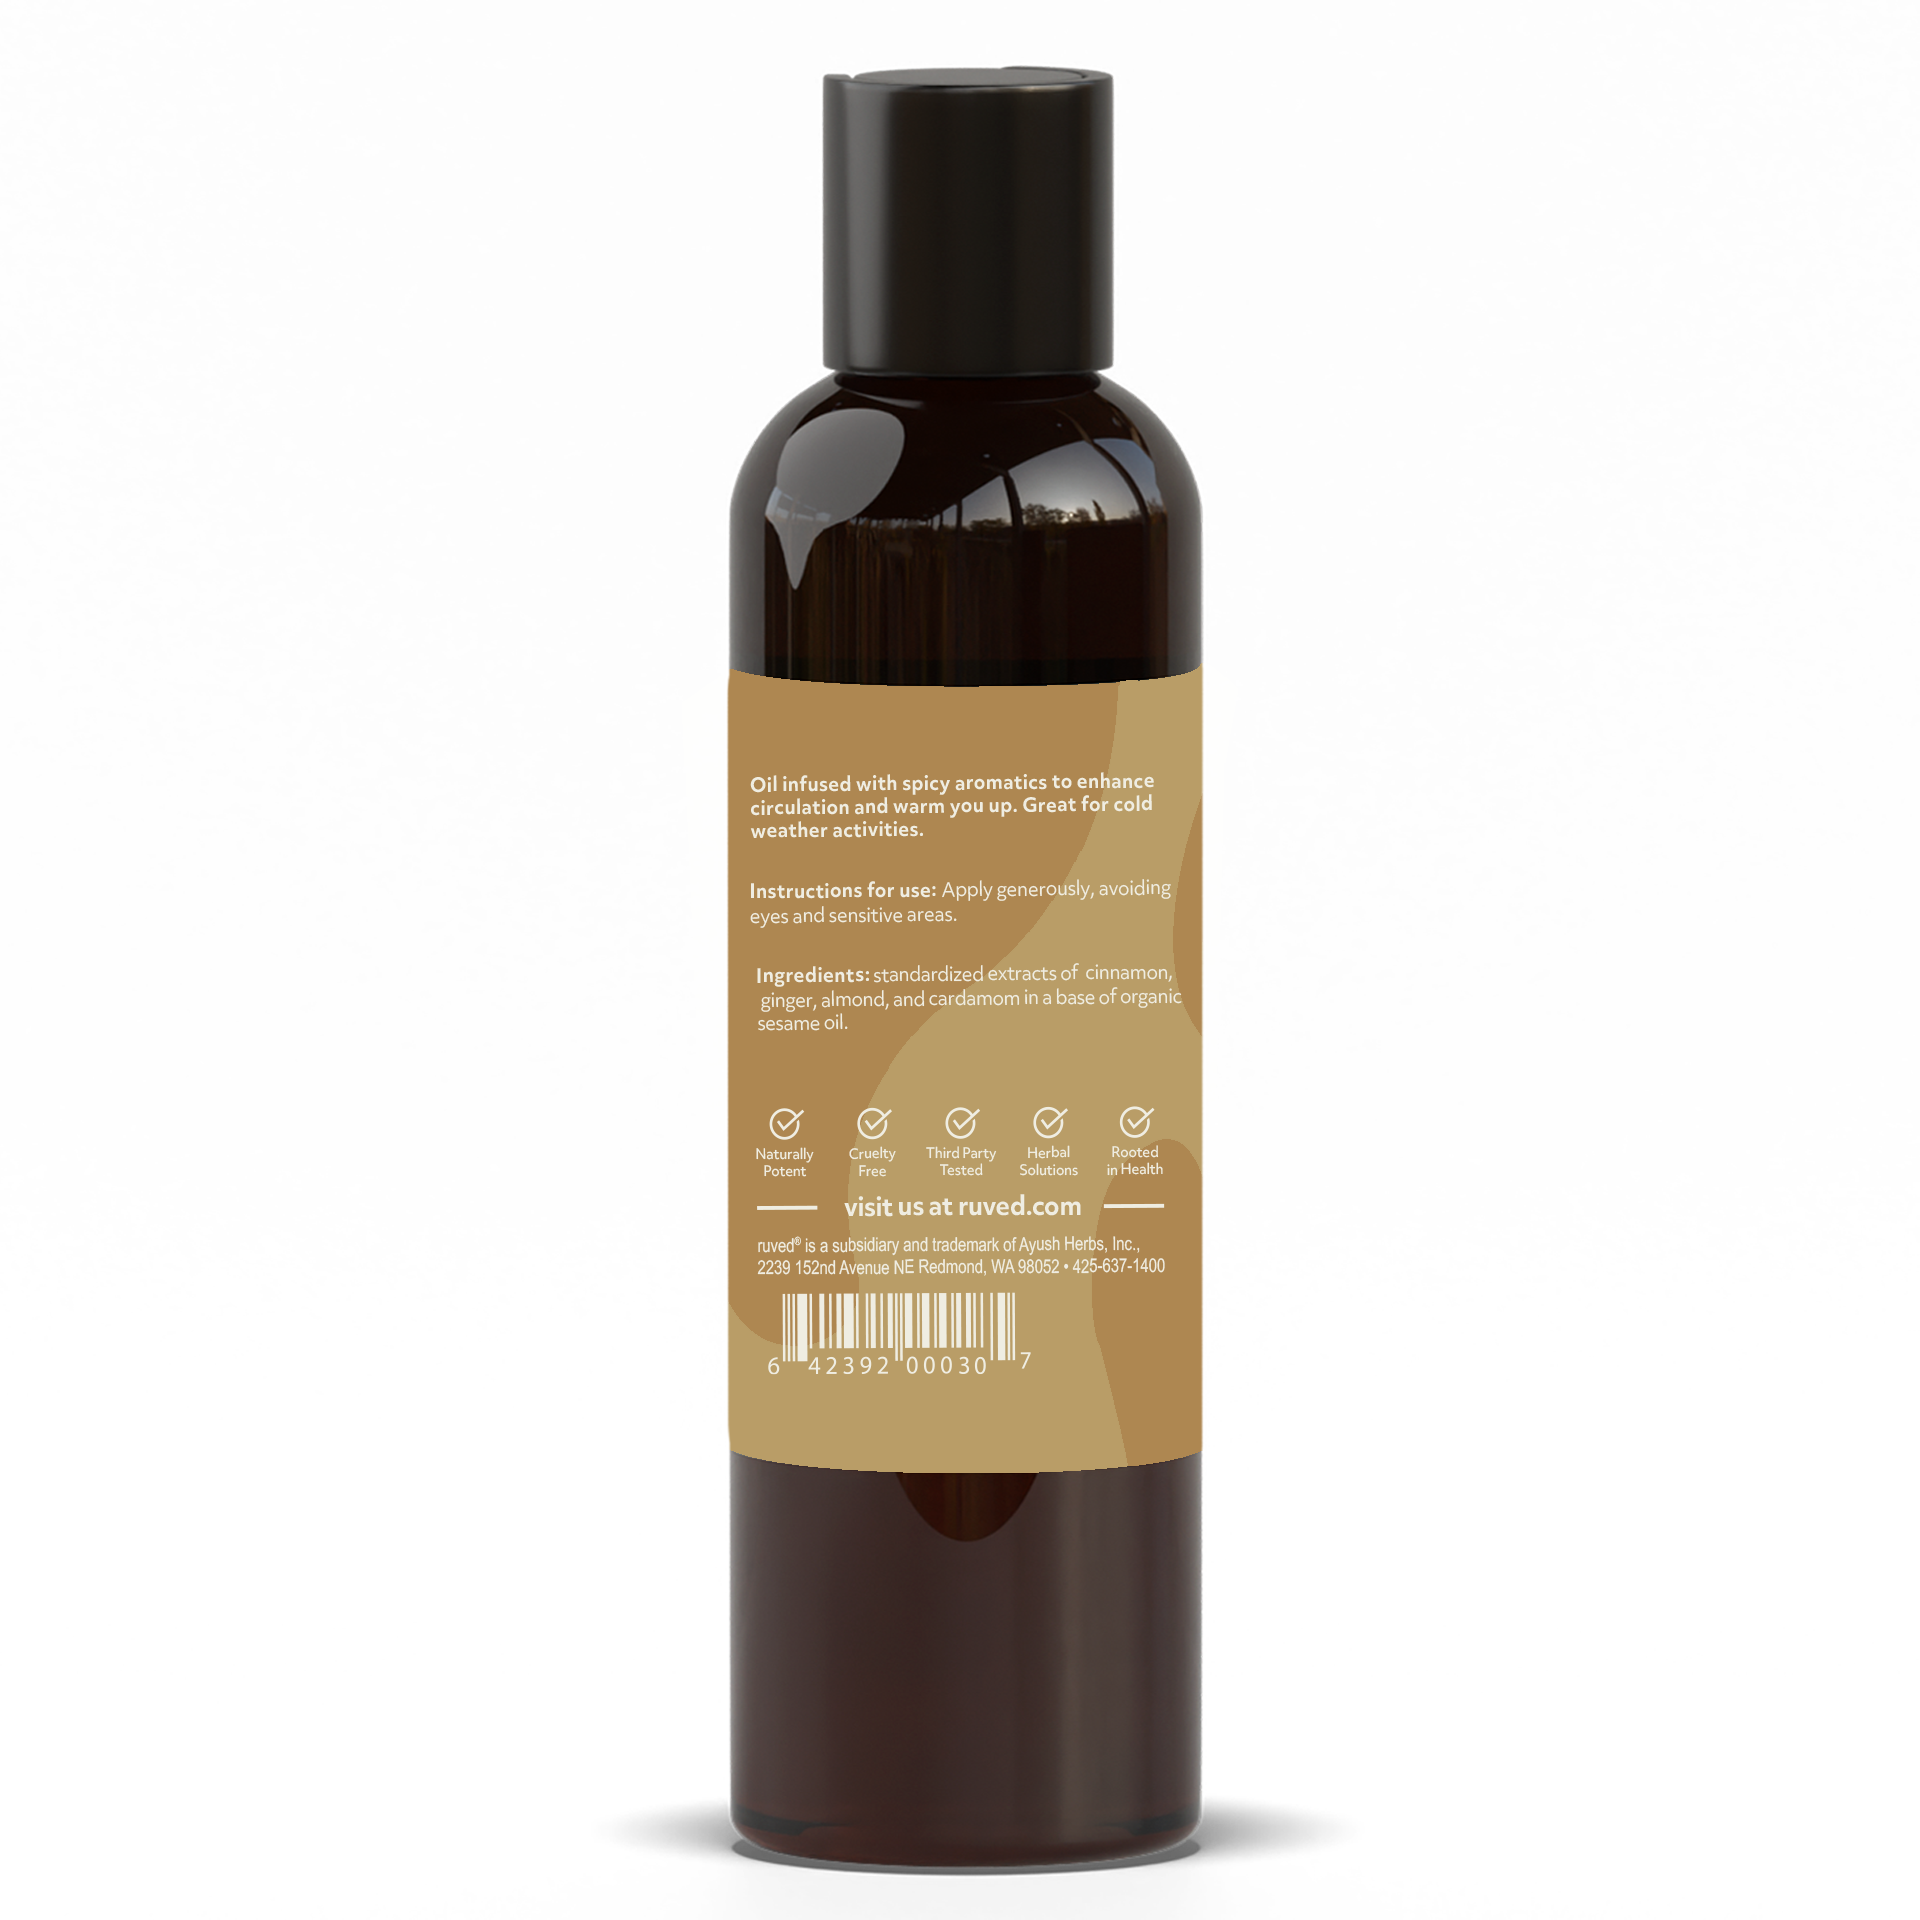 Invigorating Massage Oil Supplement Facts Back Side - Luxurious blend of natural oils to Enhance Circulation on the skin, promoting spicy aromatics for a cold appearance. 100ml Bottle.